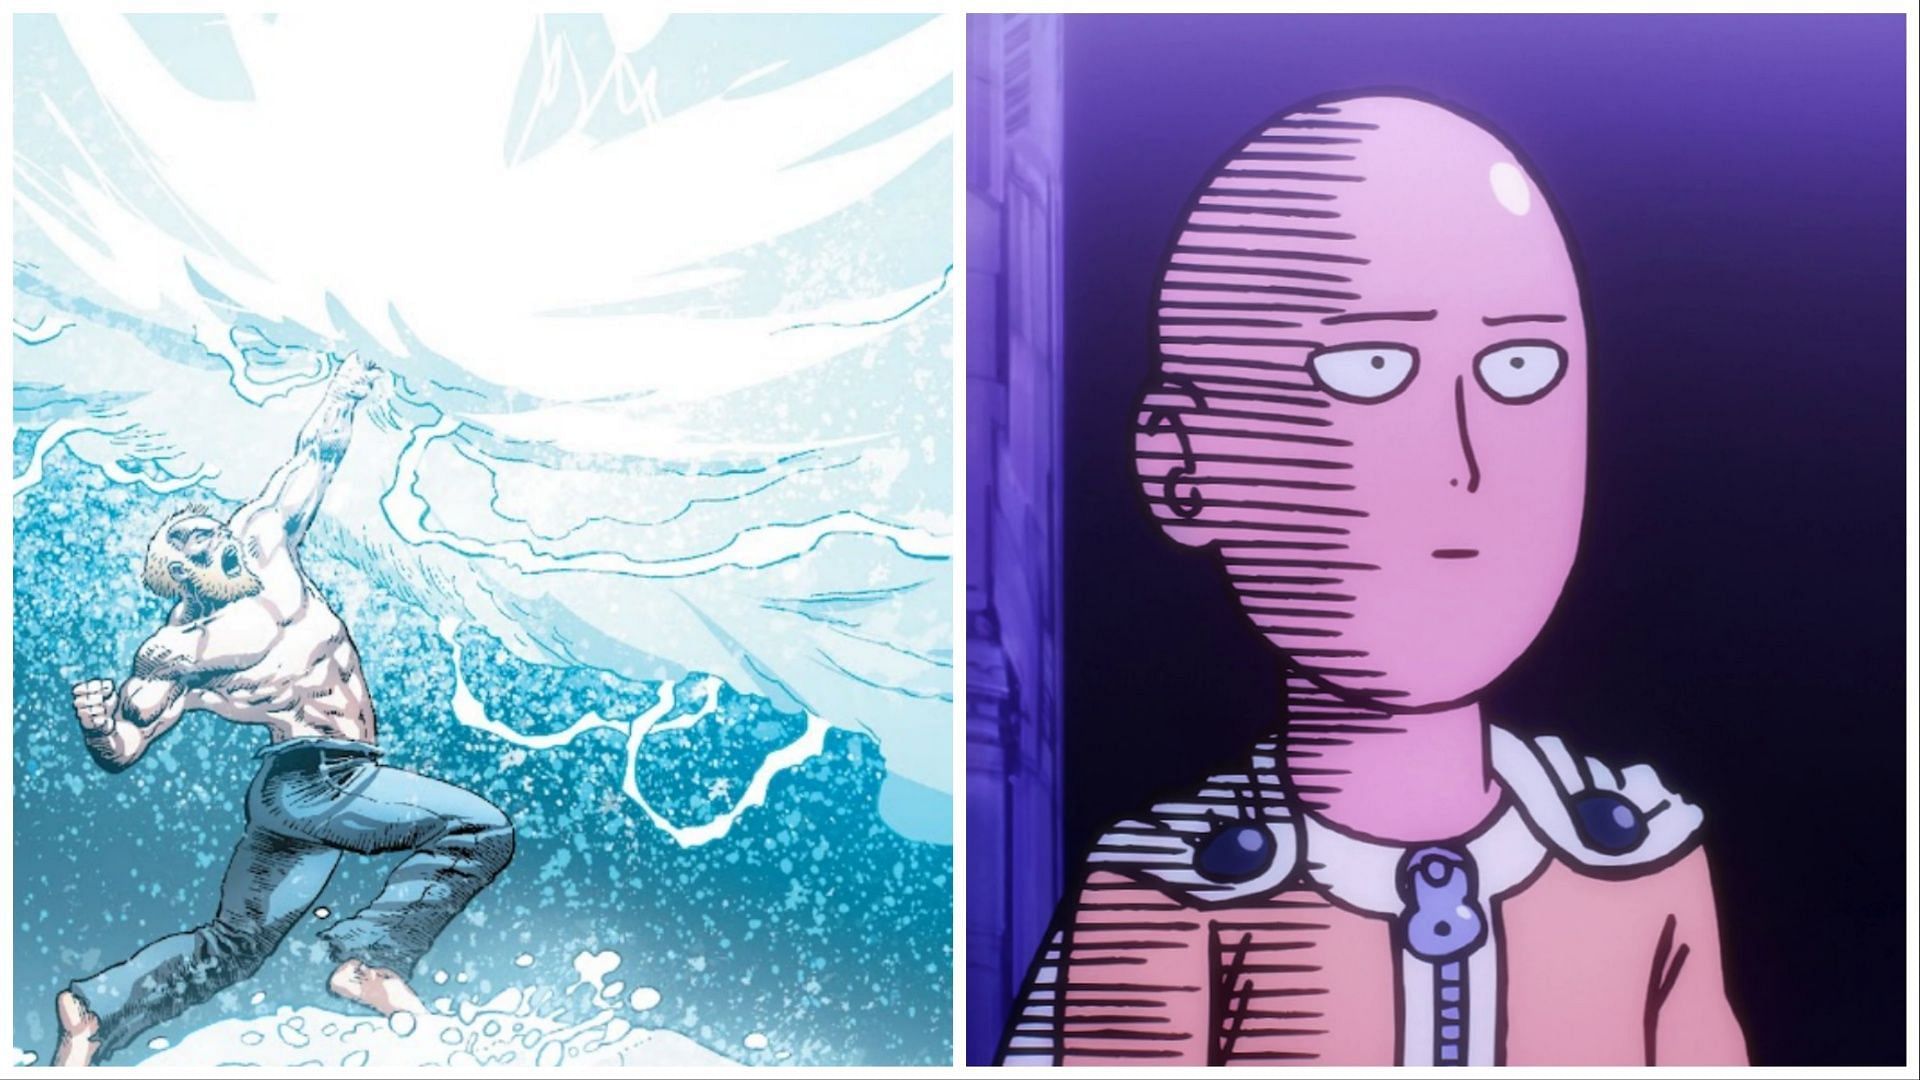 One Punch Man: Characters That Might Receive Powers From God